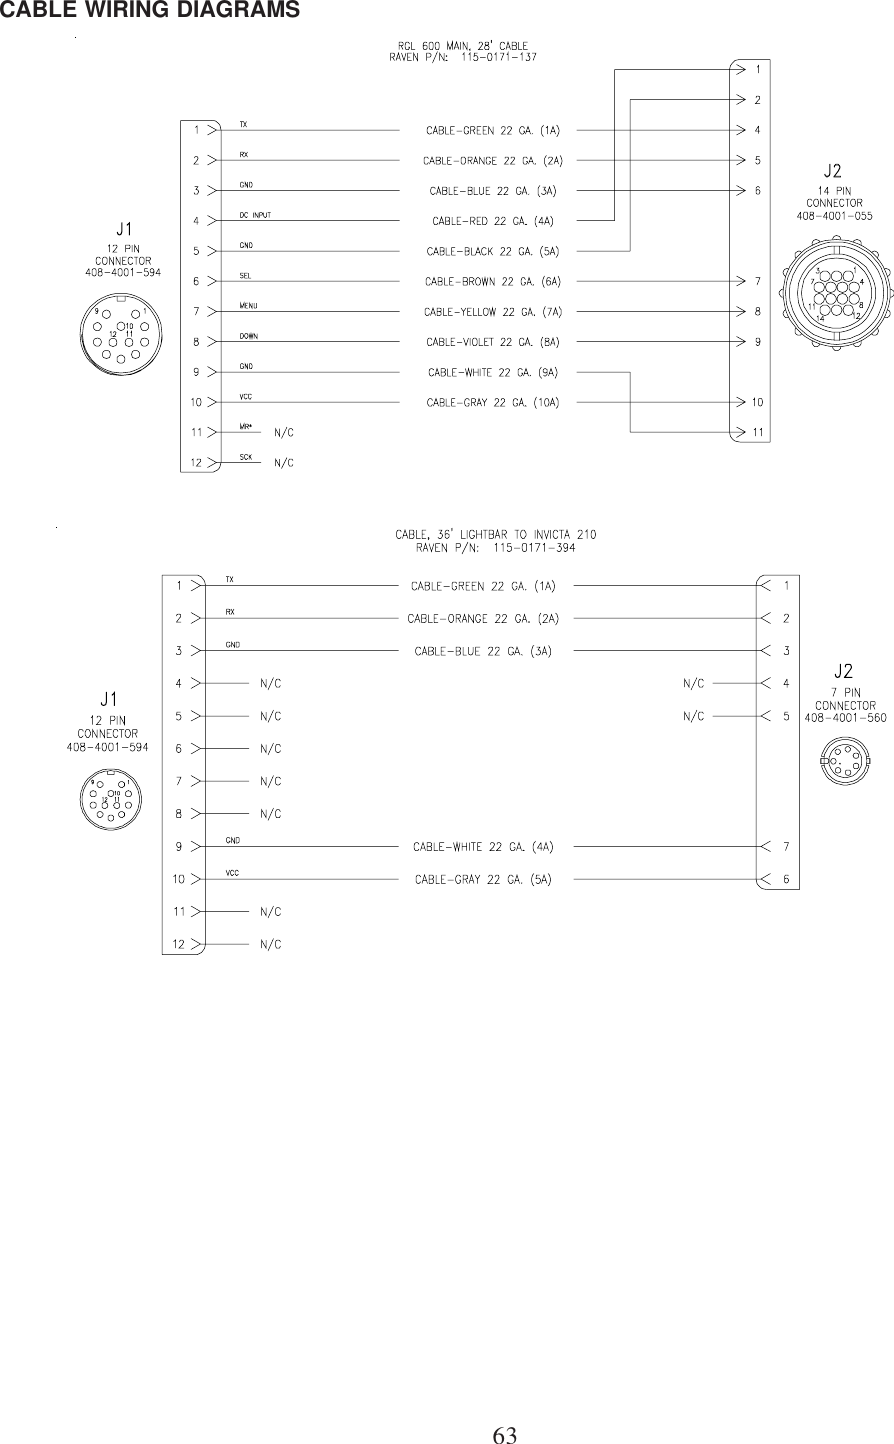 63CABLE WIRING DIAGRAMS